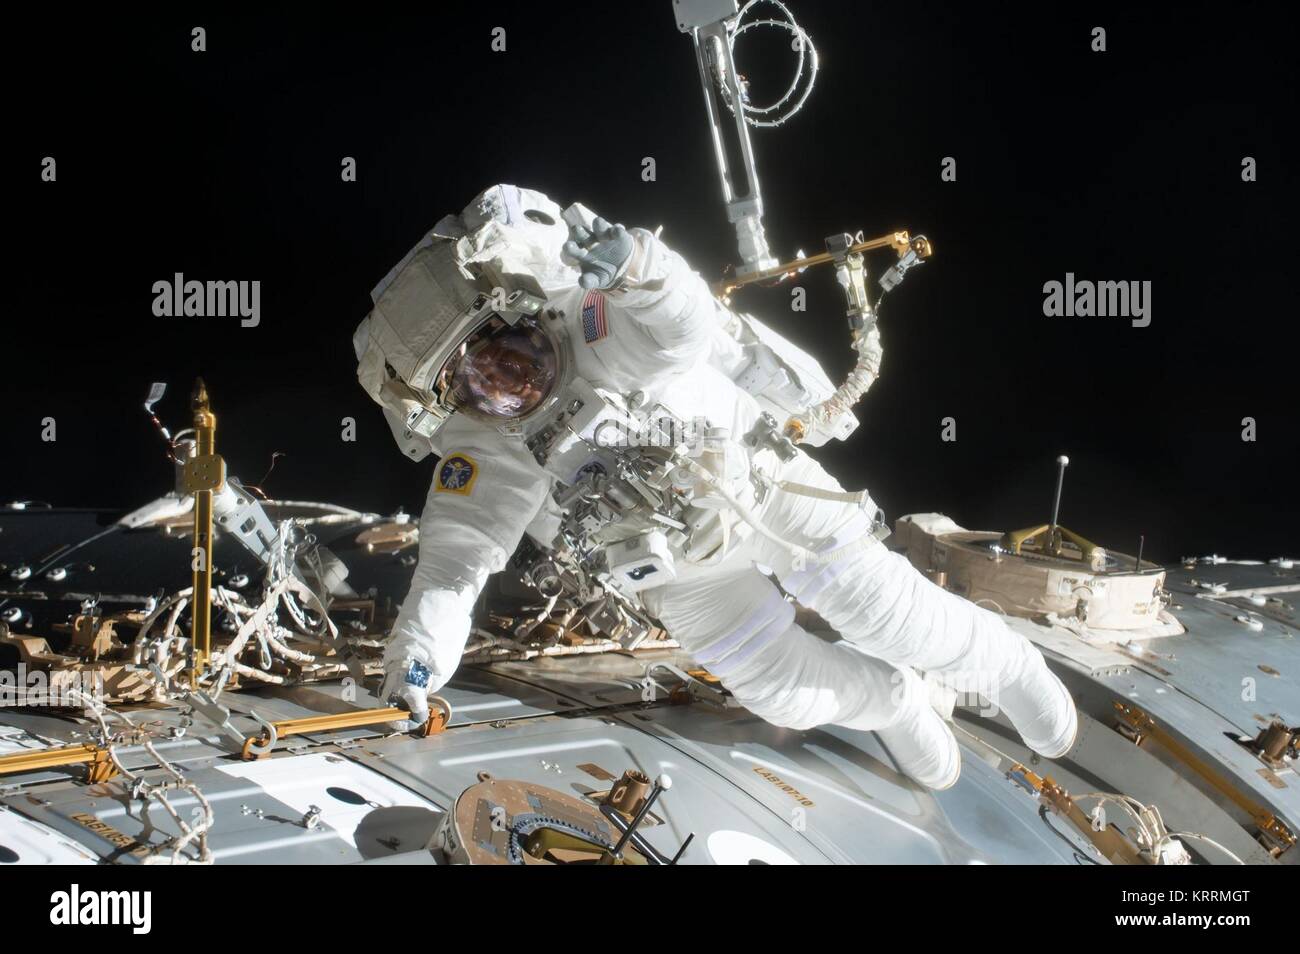 NASA International Space Station Expedition 51 prime crew member American astronaut Jack Fischer works outside the ISS U.S. Destiny Laboratory during an extravehicular activity spacewalk May 12, 2017 in Earth orbit. Stock Photo